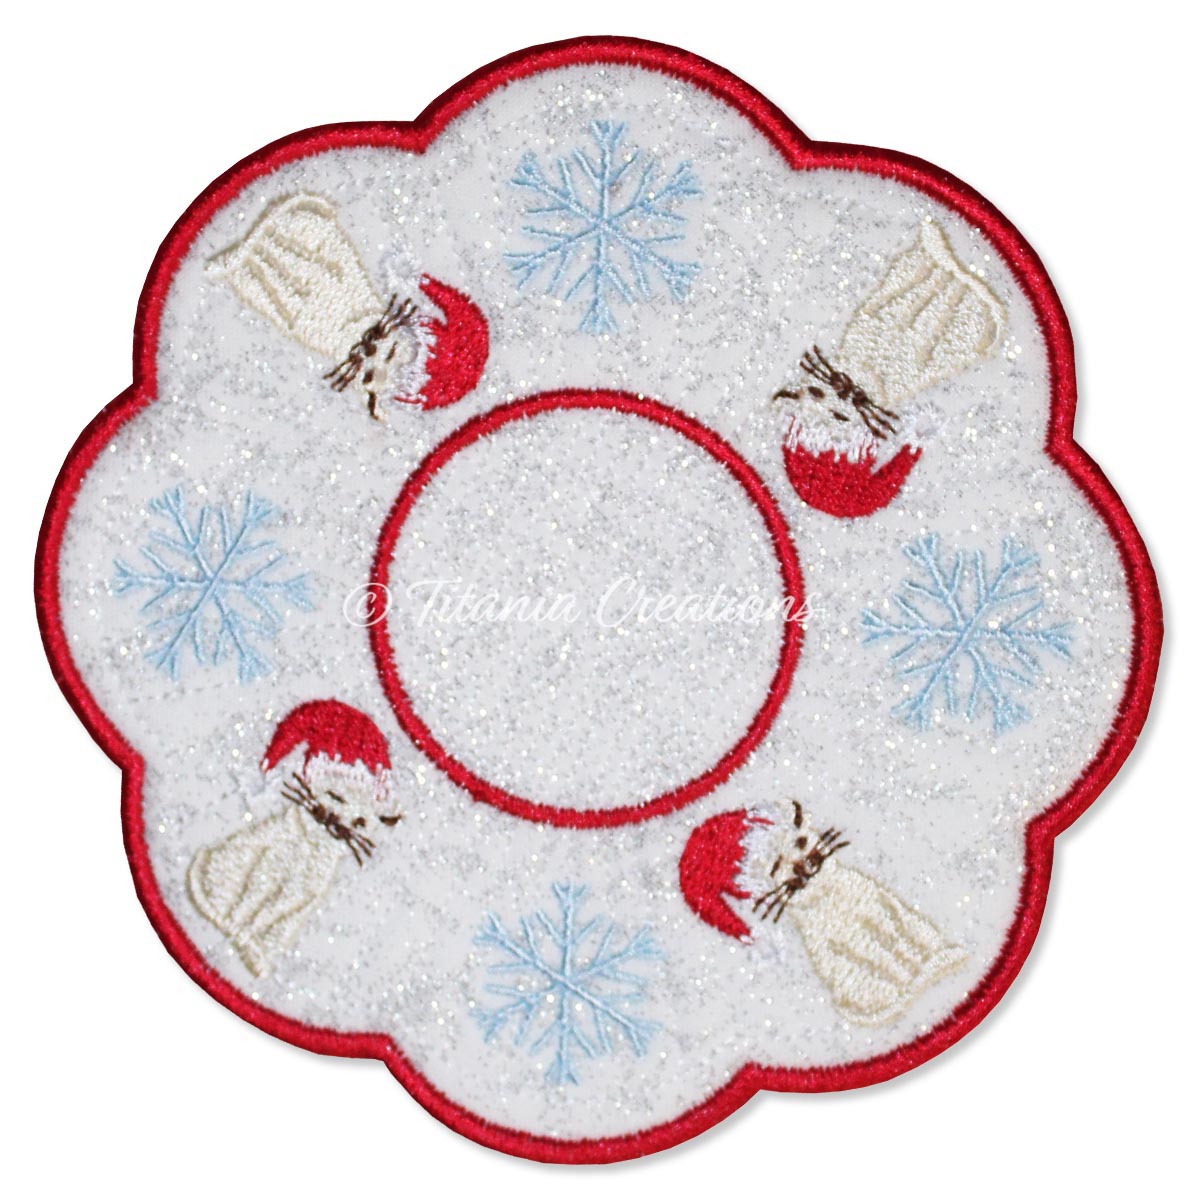 ITH Christmas Cat Candle Mat 5x5 6x6 7x7 8x8